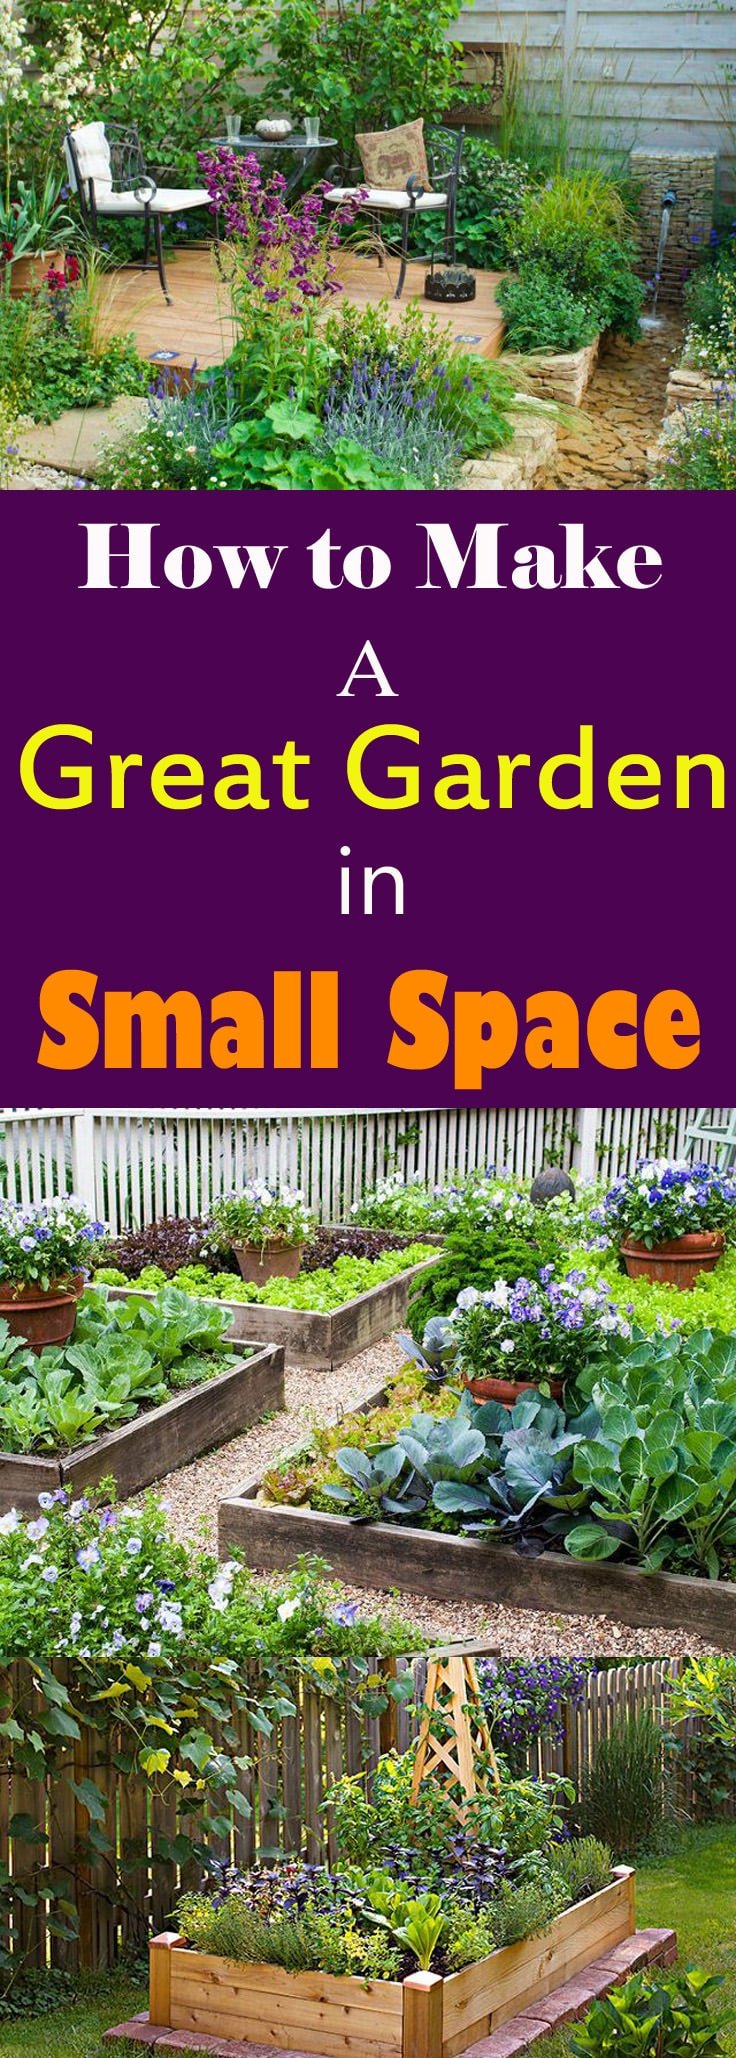 You don't need a big yard to have a great garden, it is even possible in smallest of space. Take a look!